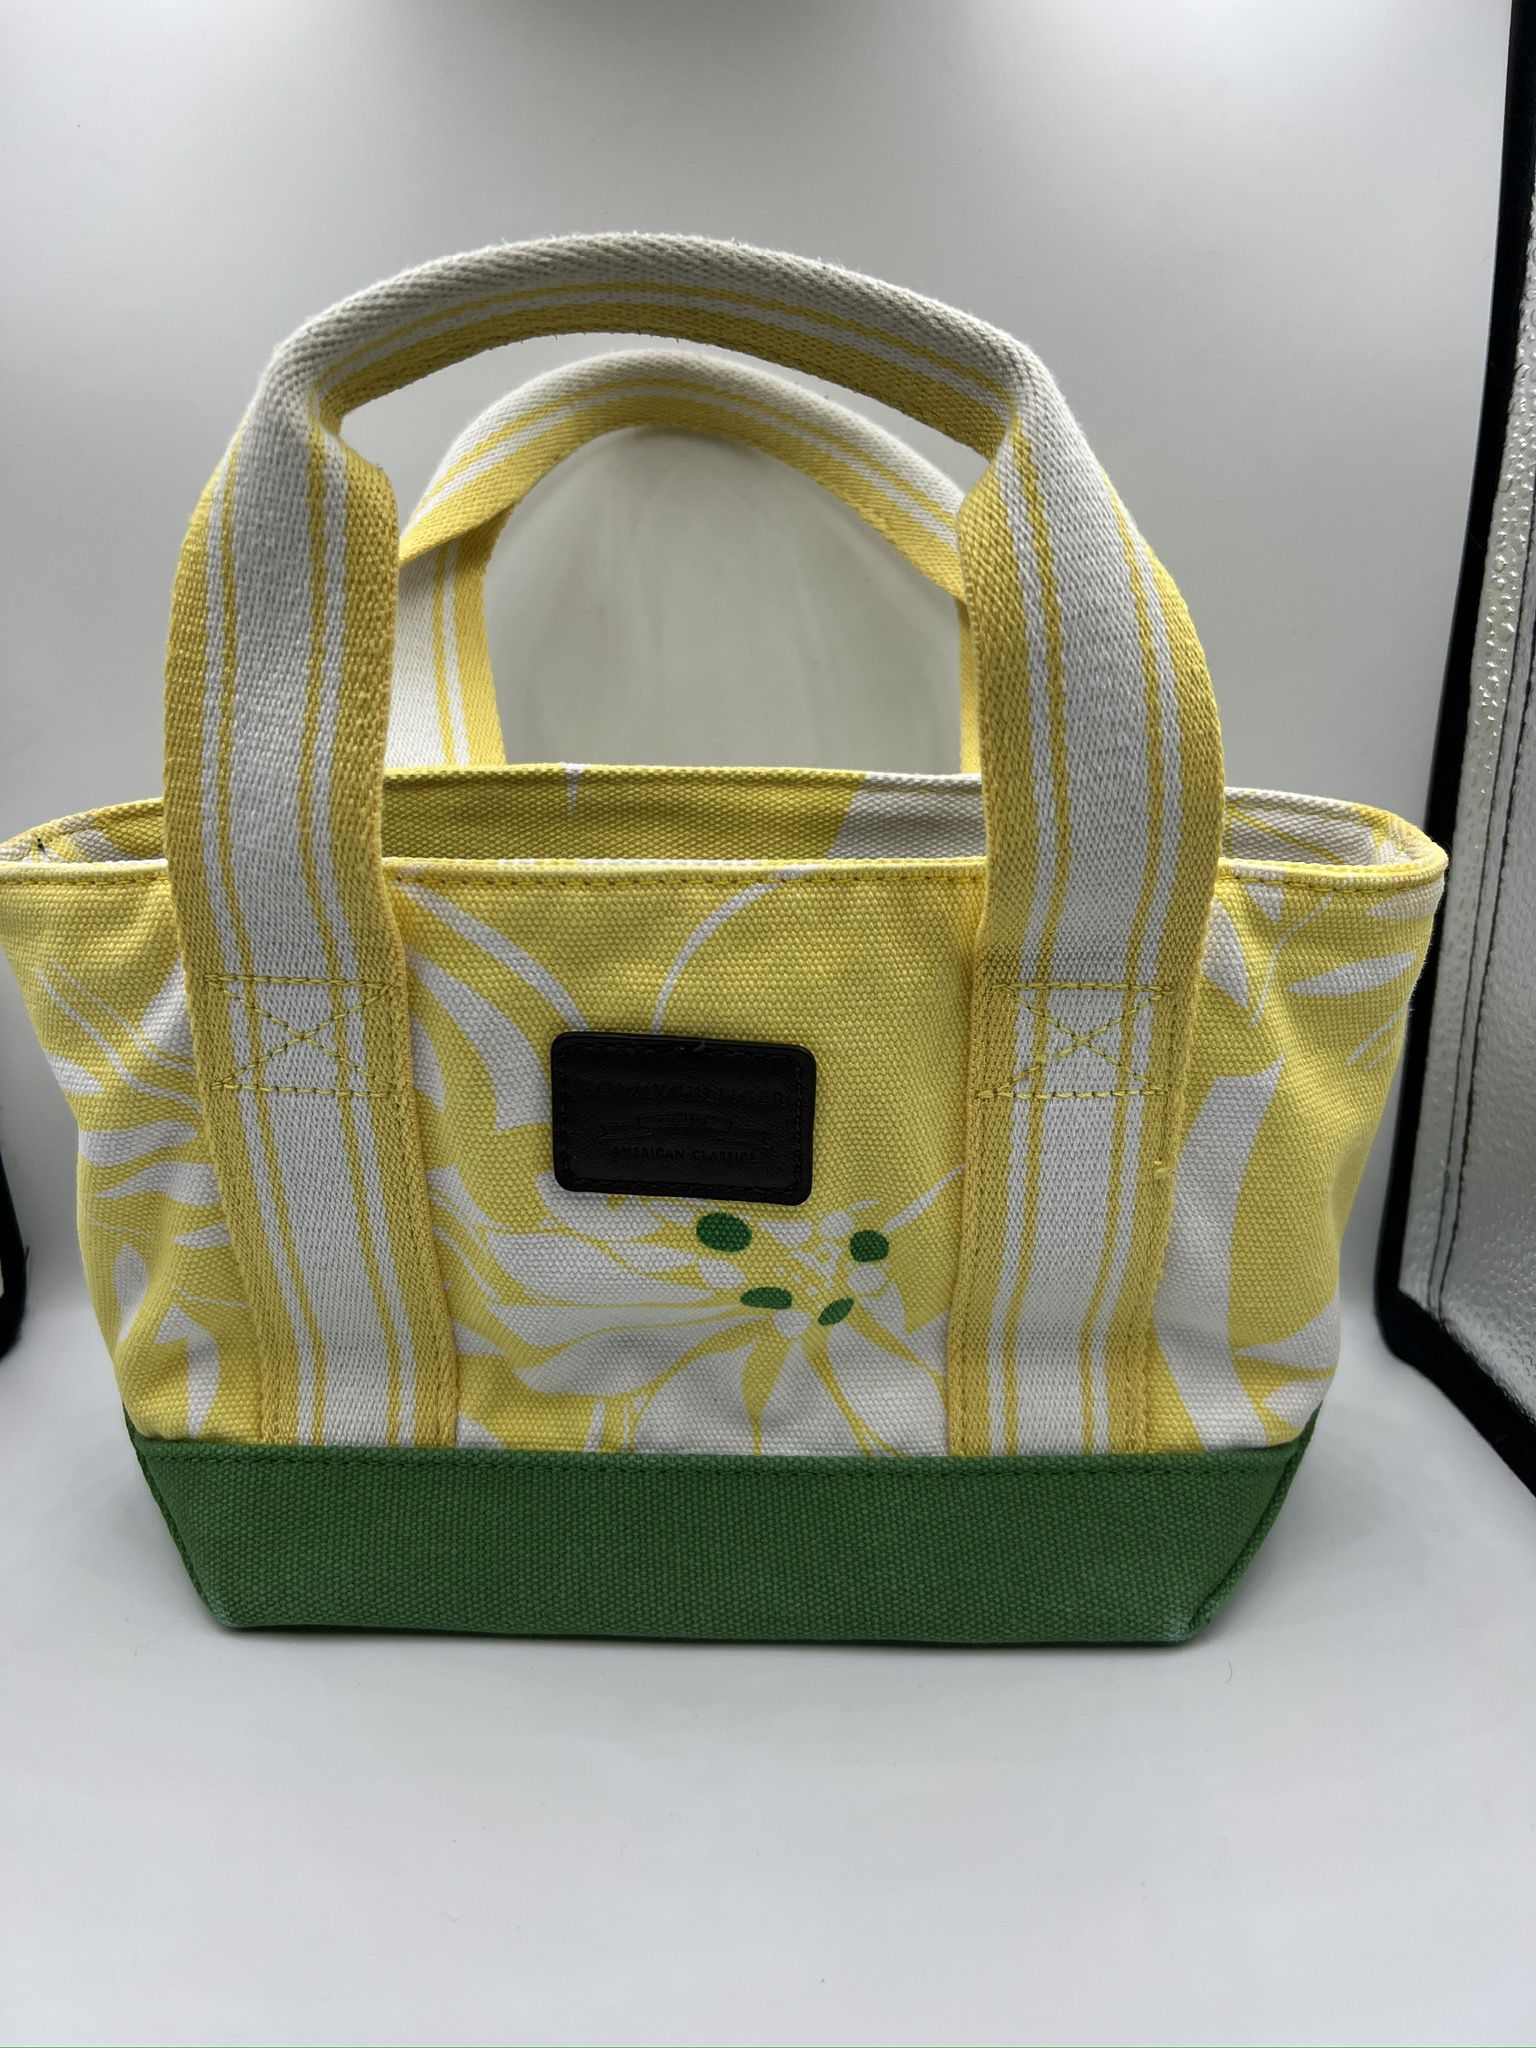 Vintage Tommy Hilfiger small yellow and green tote -Nano size tote-2002 edition